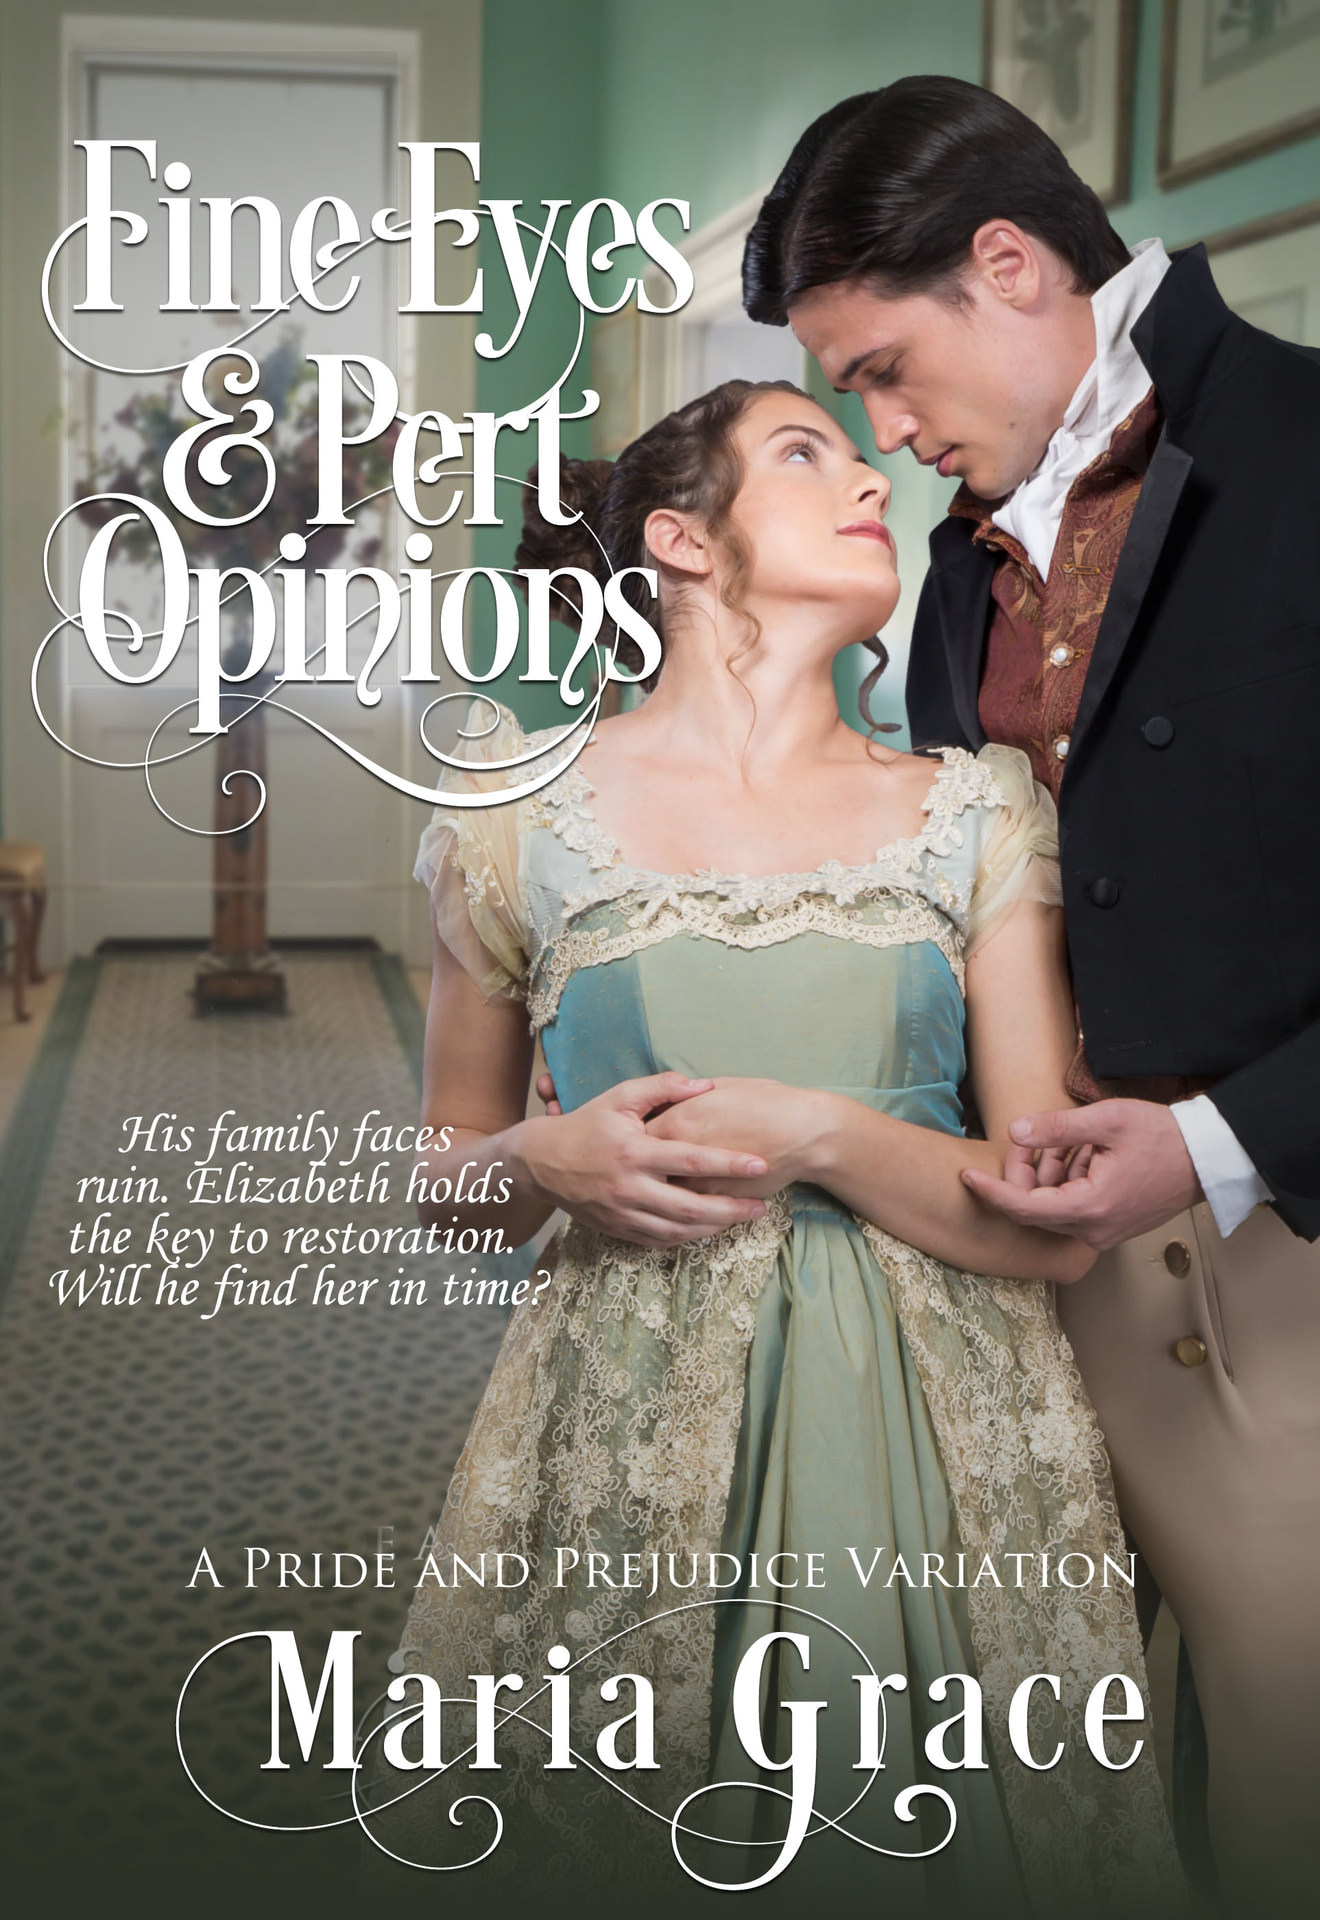 Fine Eyes and Pert Opinions: A Pride and Prejudice Variation